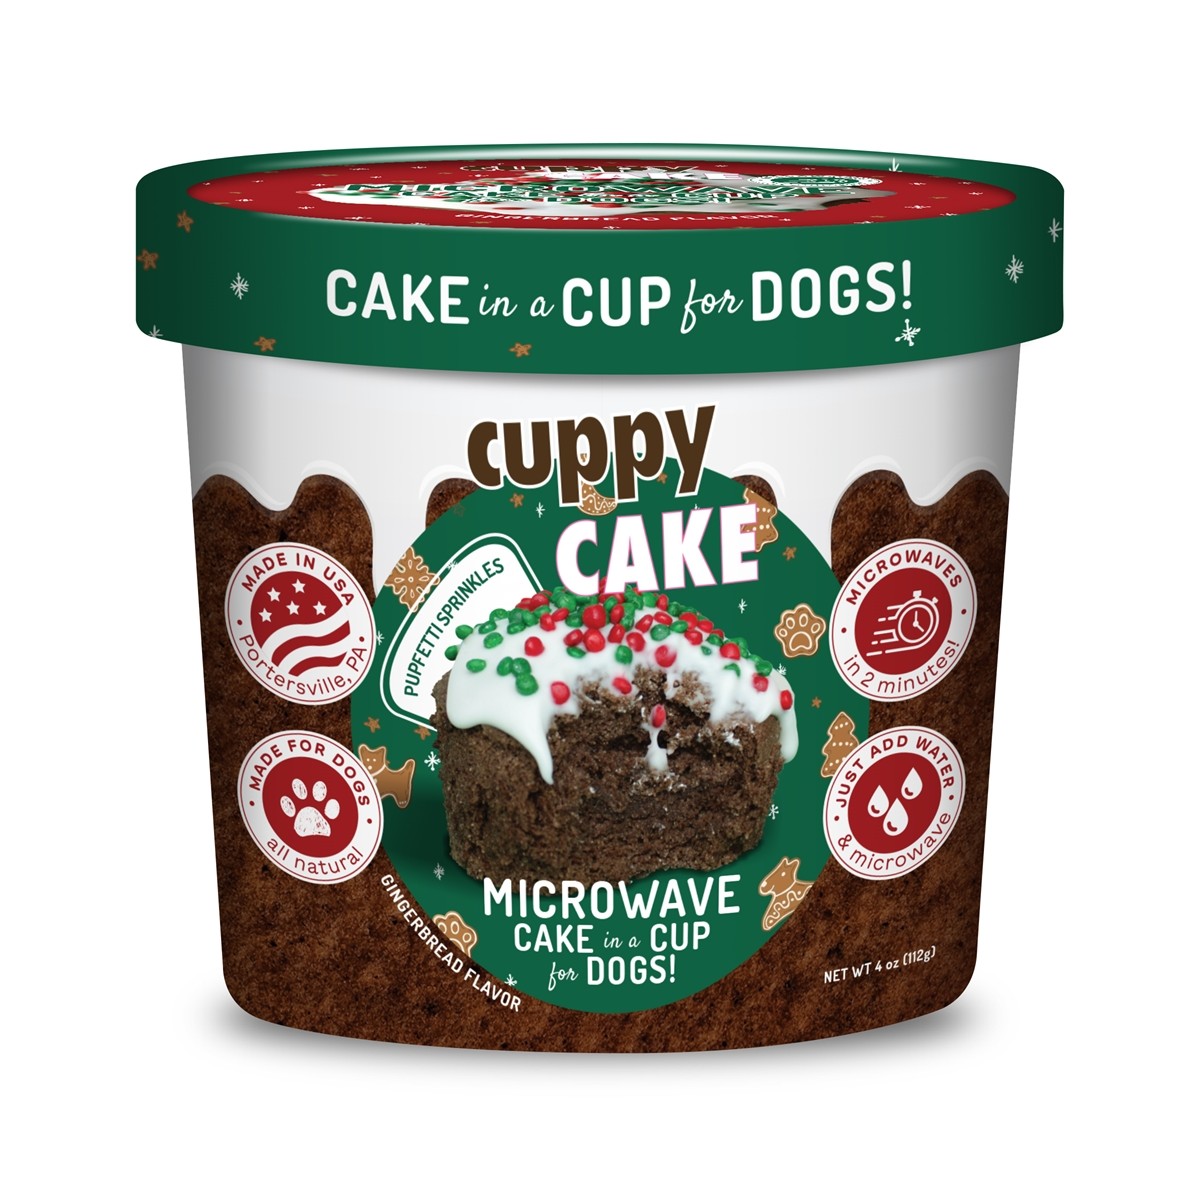 Cuppy Cake Holiday Microwave Dog Cake Mix - Gingerbread with Pupfetti Sprinkles